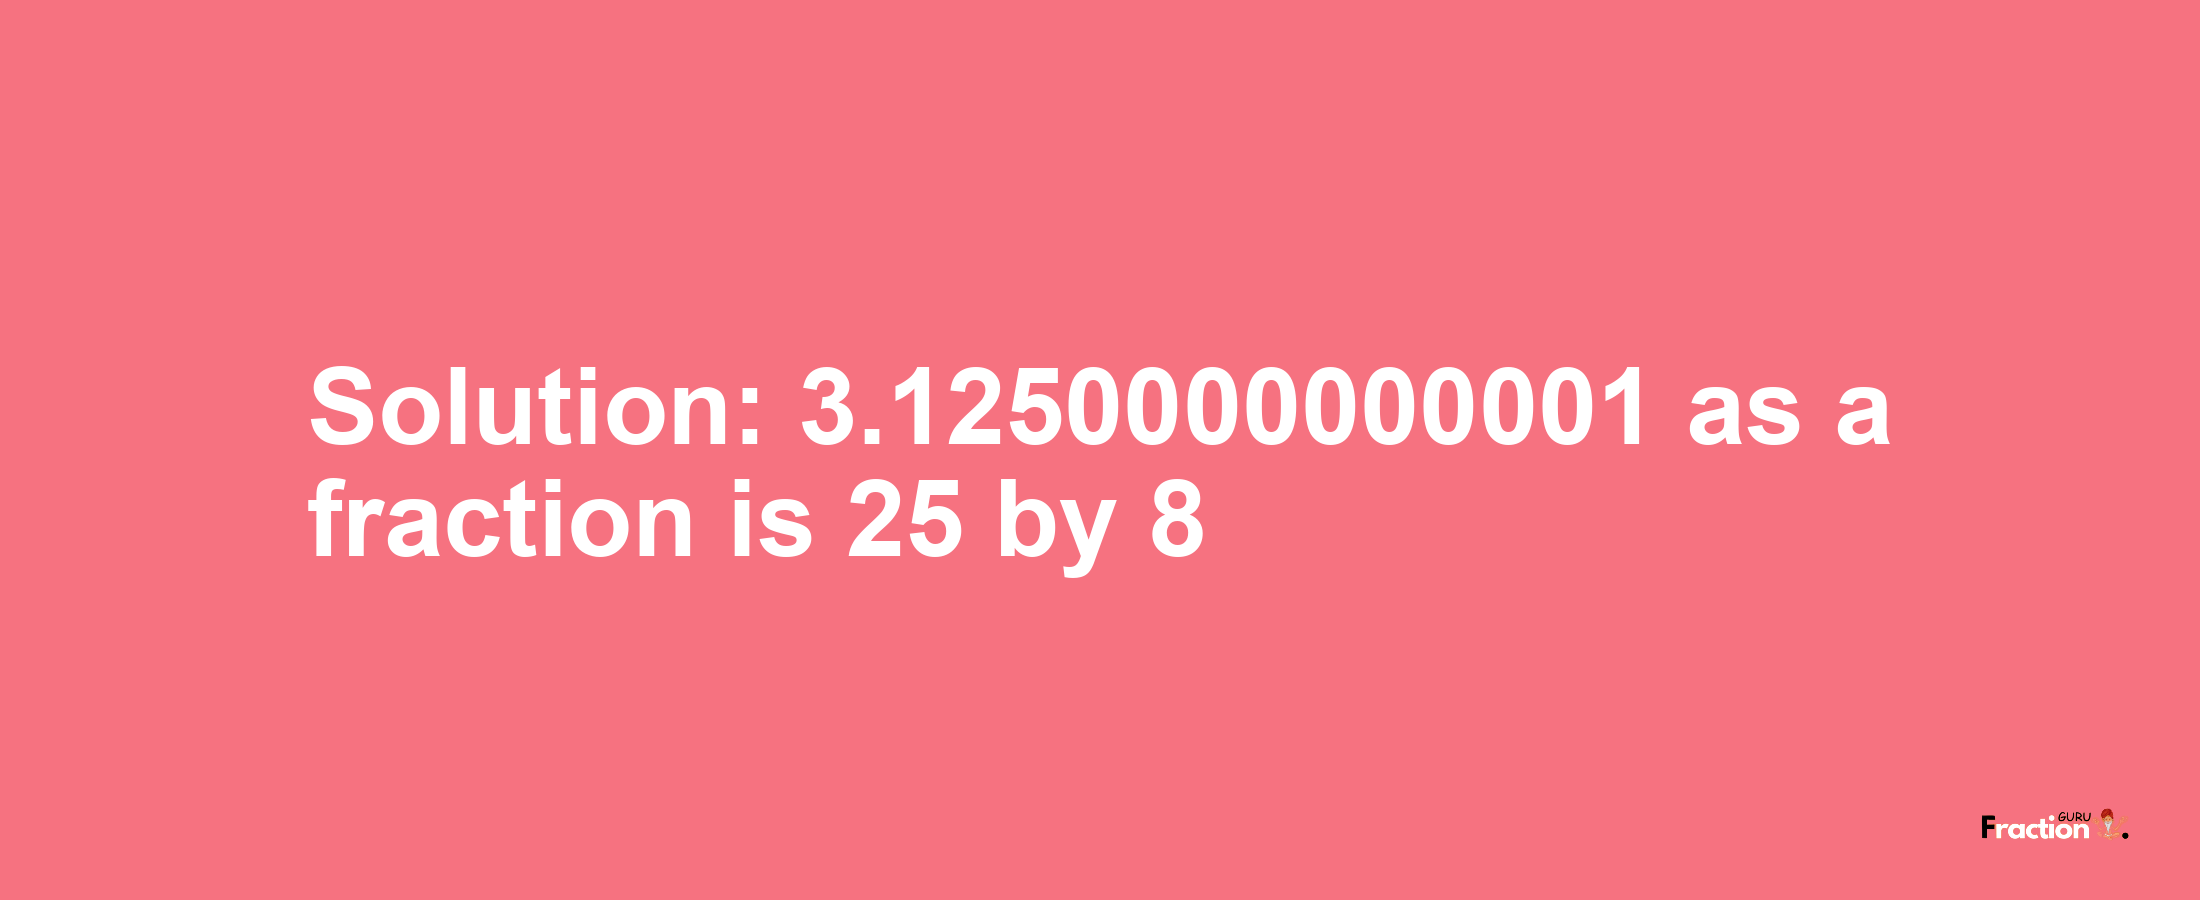 Solution:3.1250000000001 as a fraction is 25/8